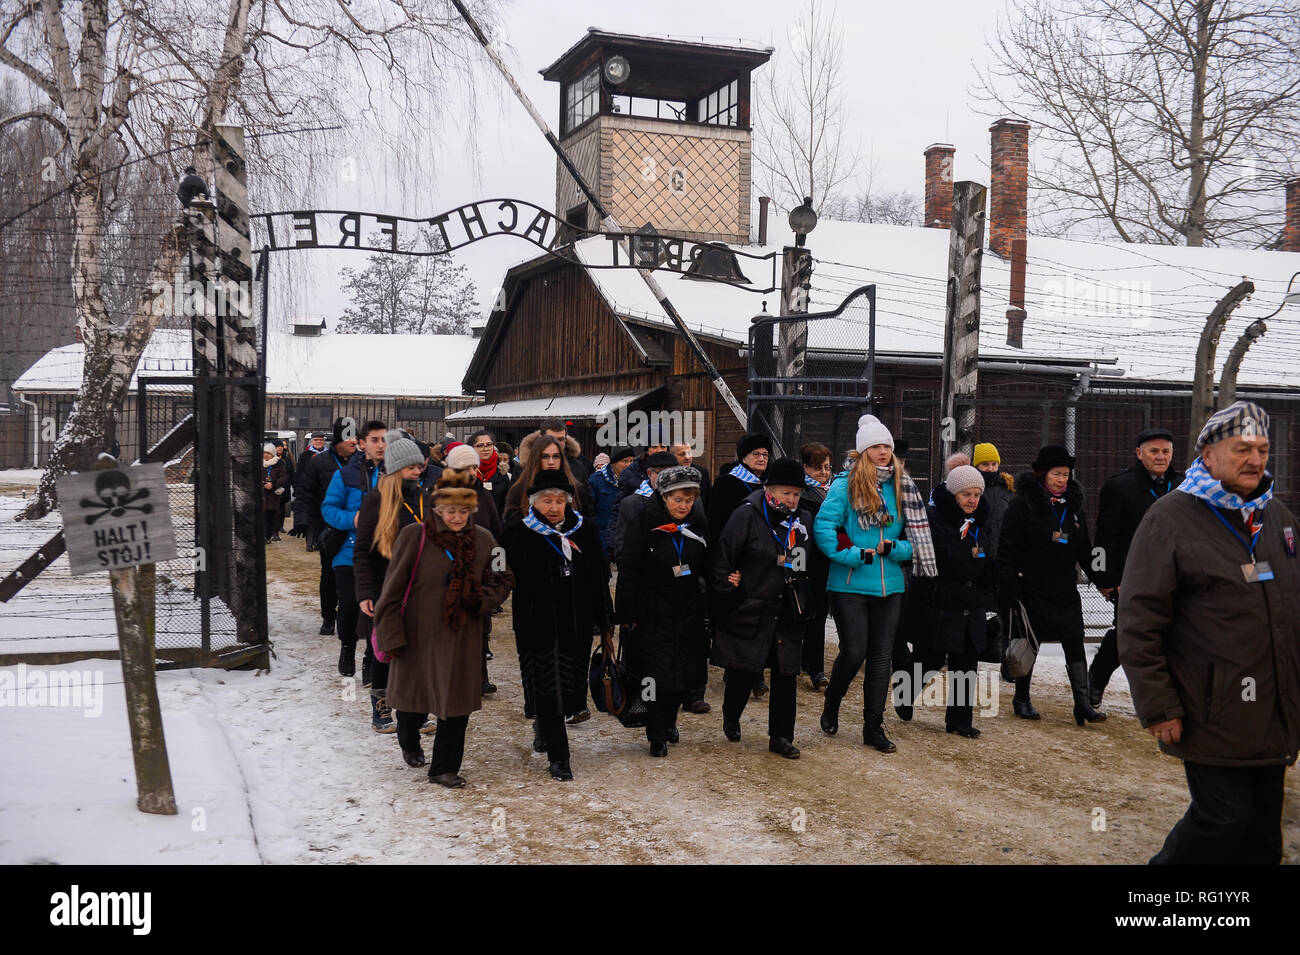 Auschwitz survivors are seen crossing the famous gate at the Nazi German Auschwitz-Birkenau death camp during the 74th Anniversary of Auschwitz Liberation. Stock Photo